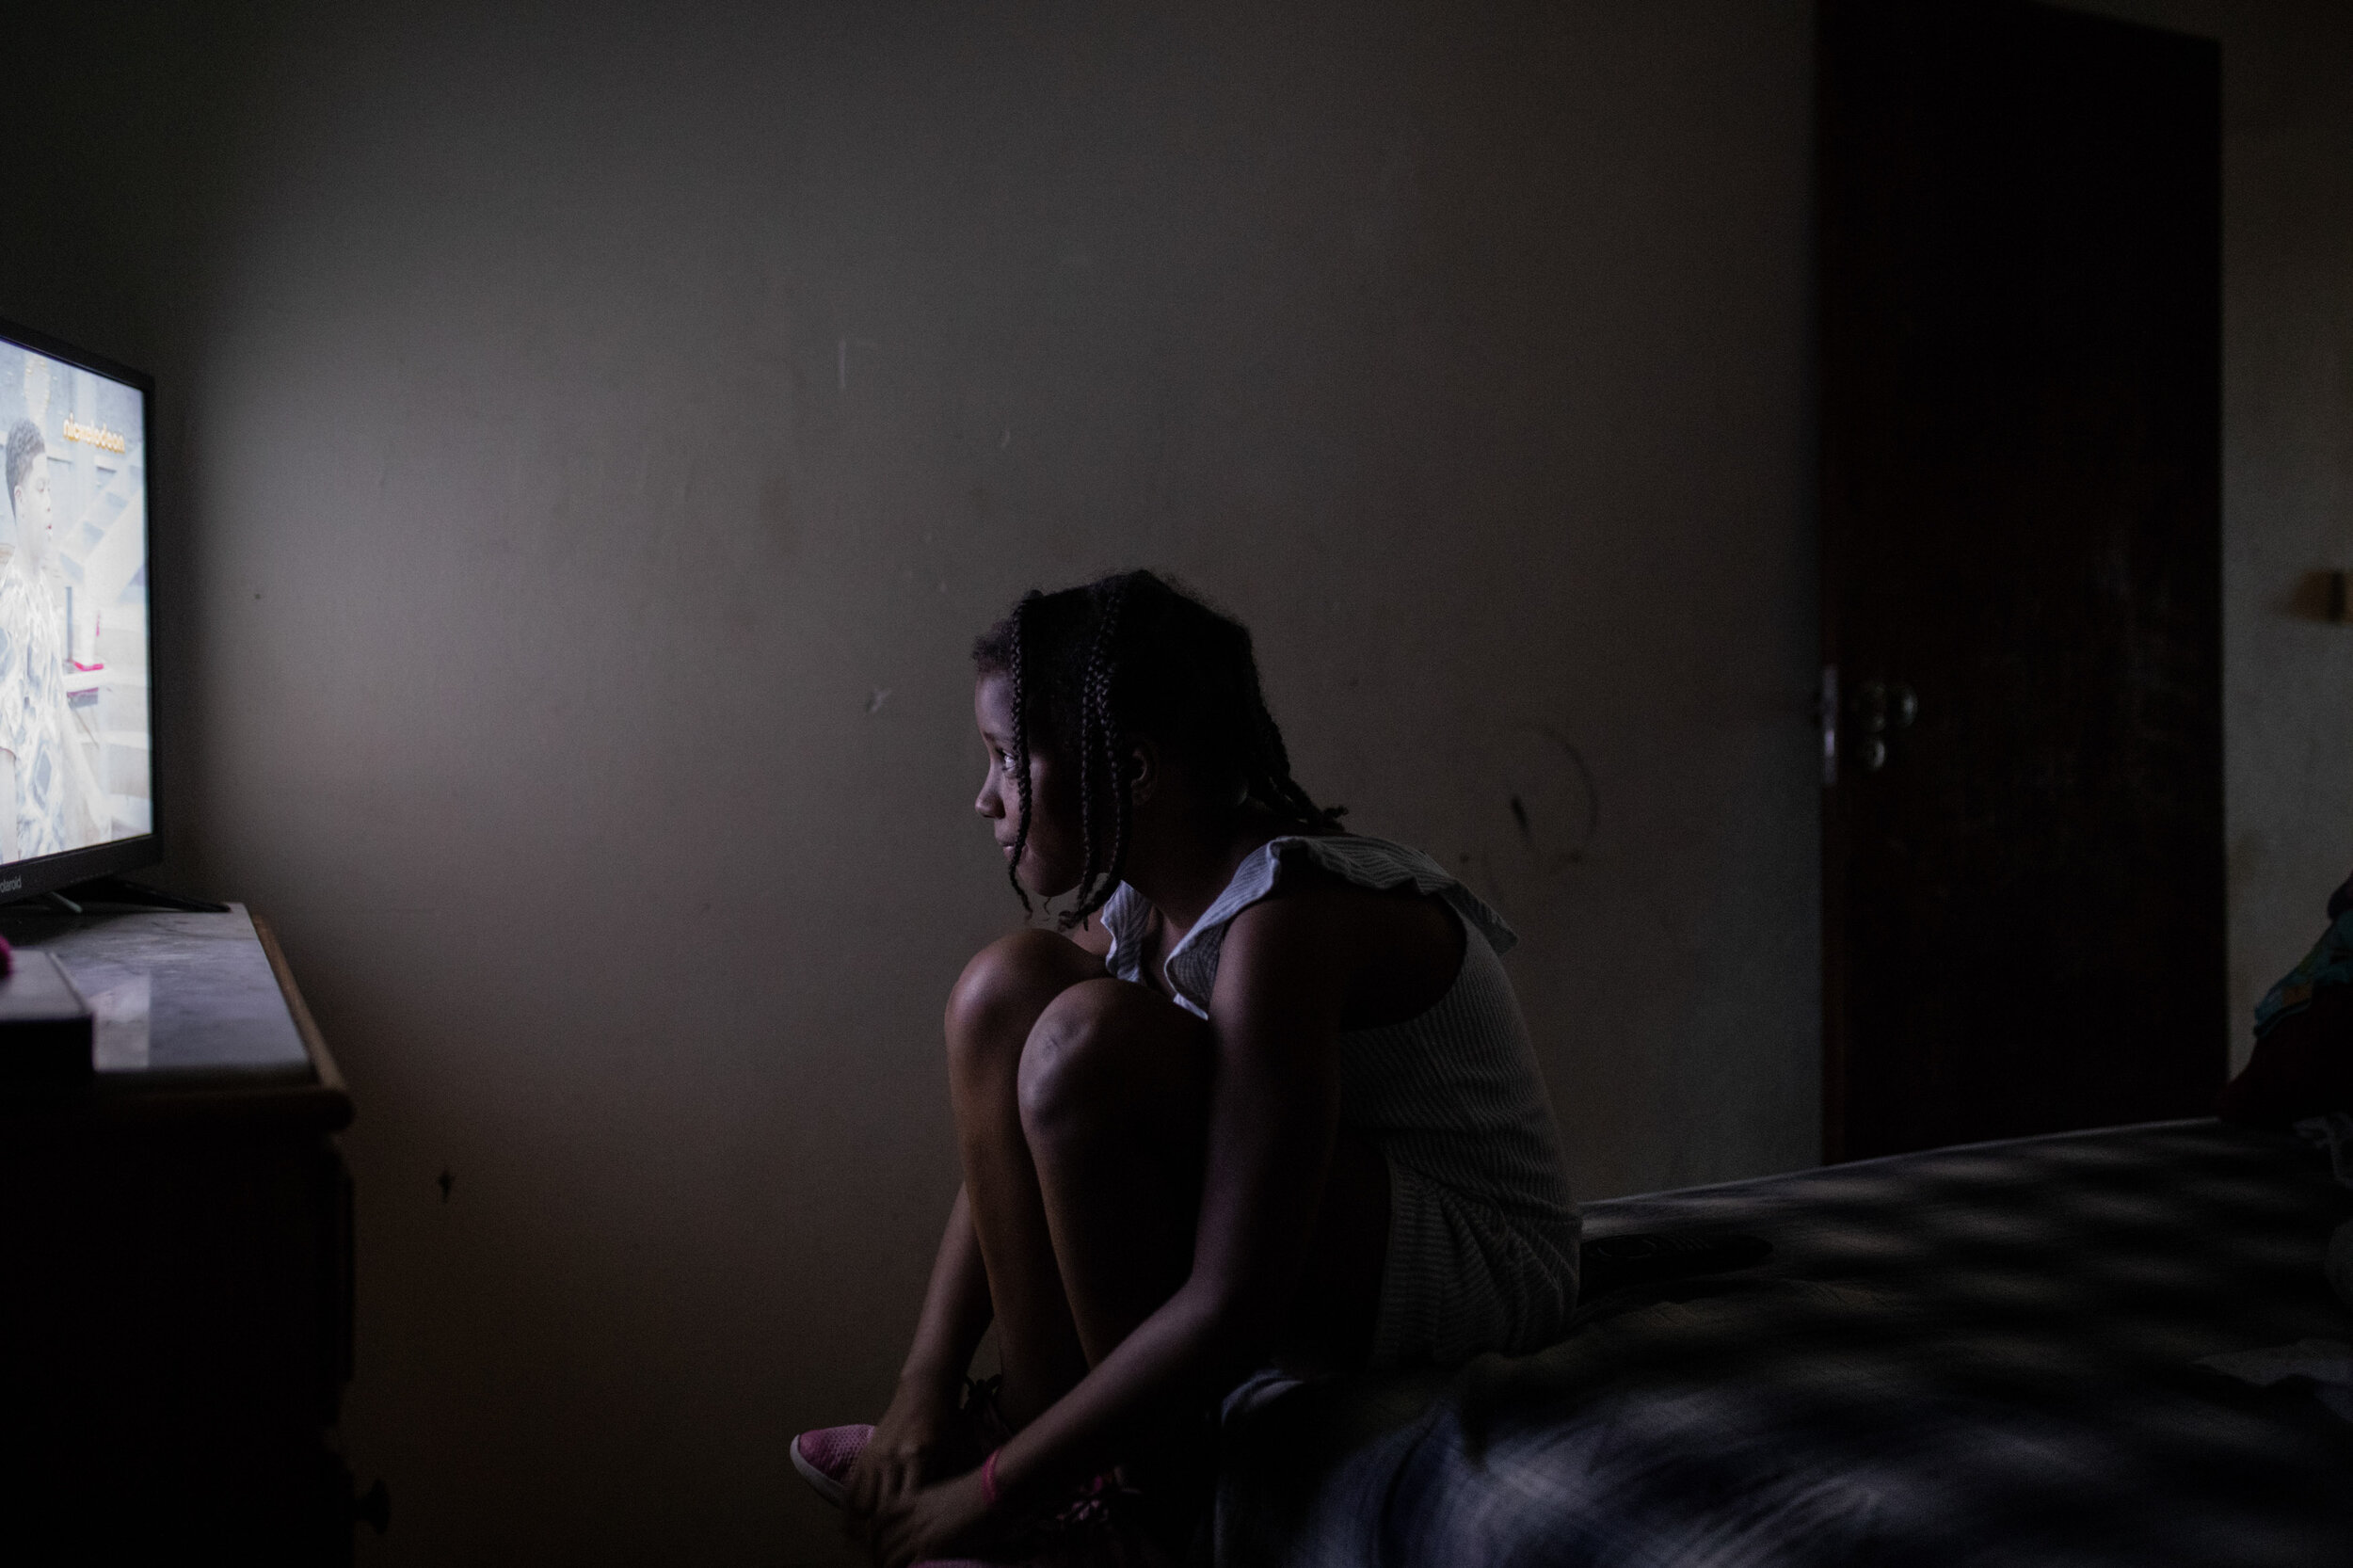  12th of October 2019   Fabiana watches TV at her occupied apartment in Zona J, Lisbon. According to housing rights activists, there are hundreds of families, many single mothers,  with no other option than to occupy abandoned apartments.    